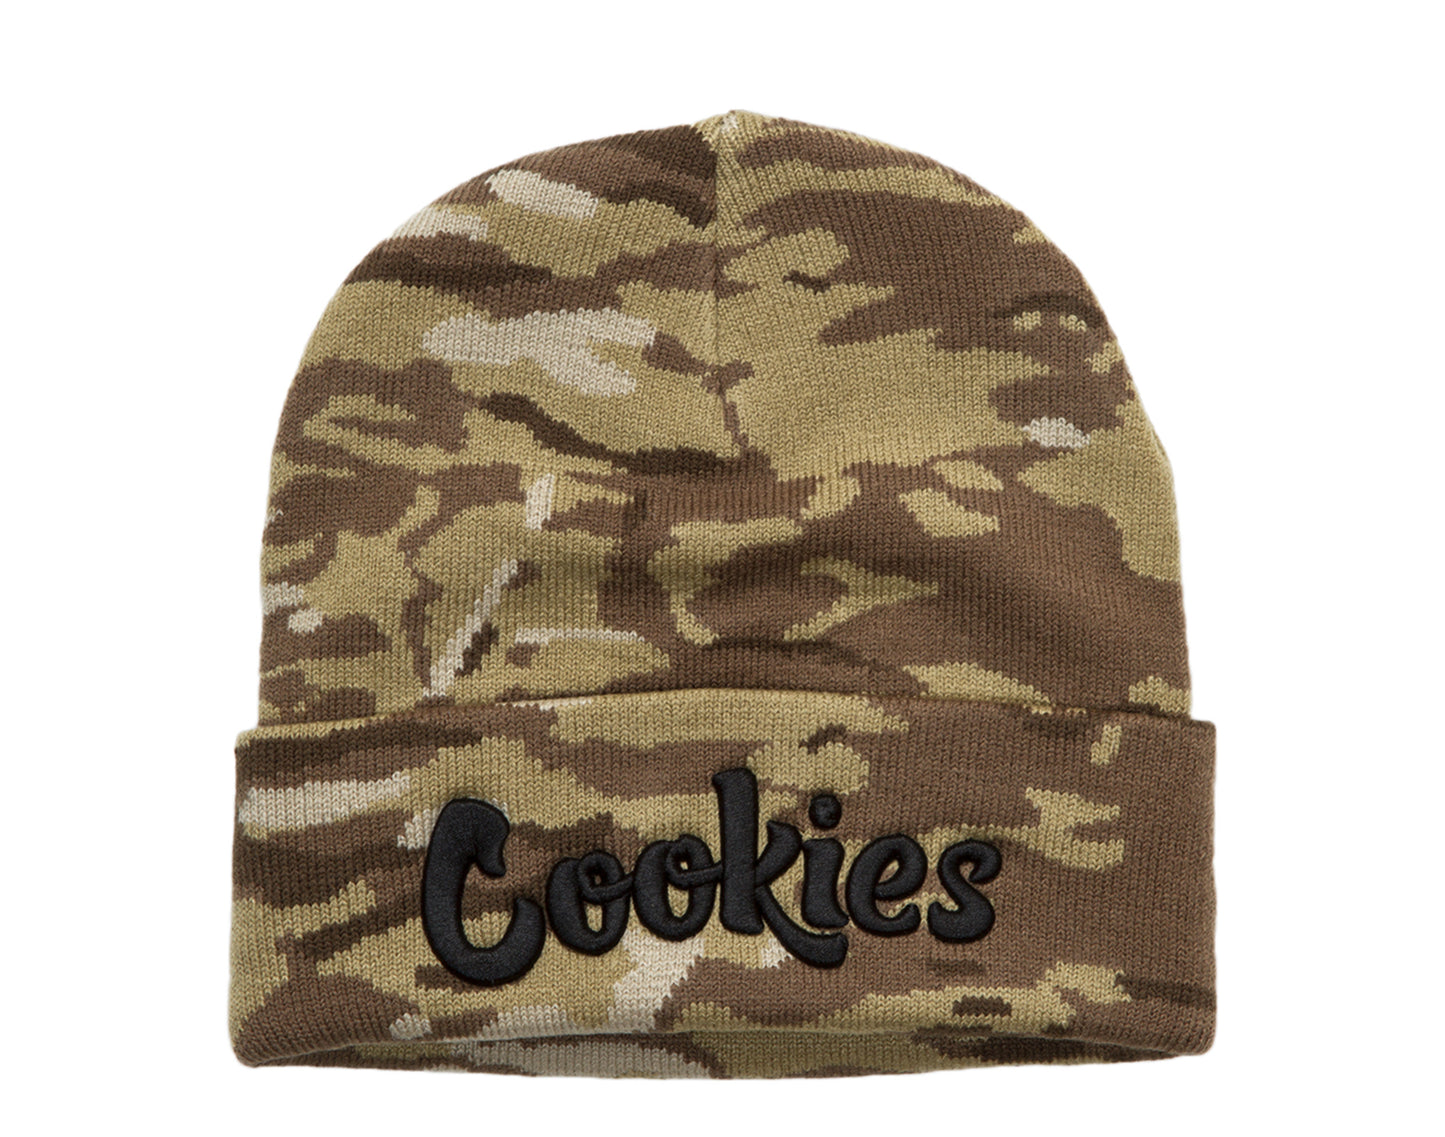 Cookies Backcountry Embroidered Camo Tan Knit Beanie Hat 1546X4310-TAC